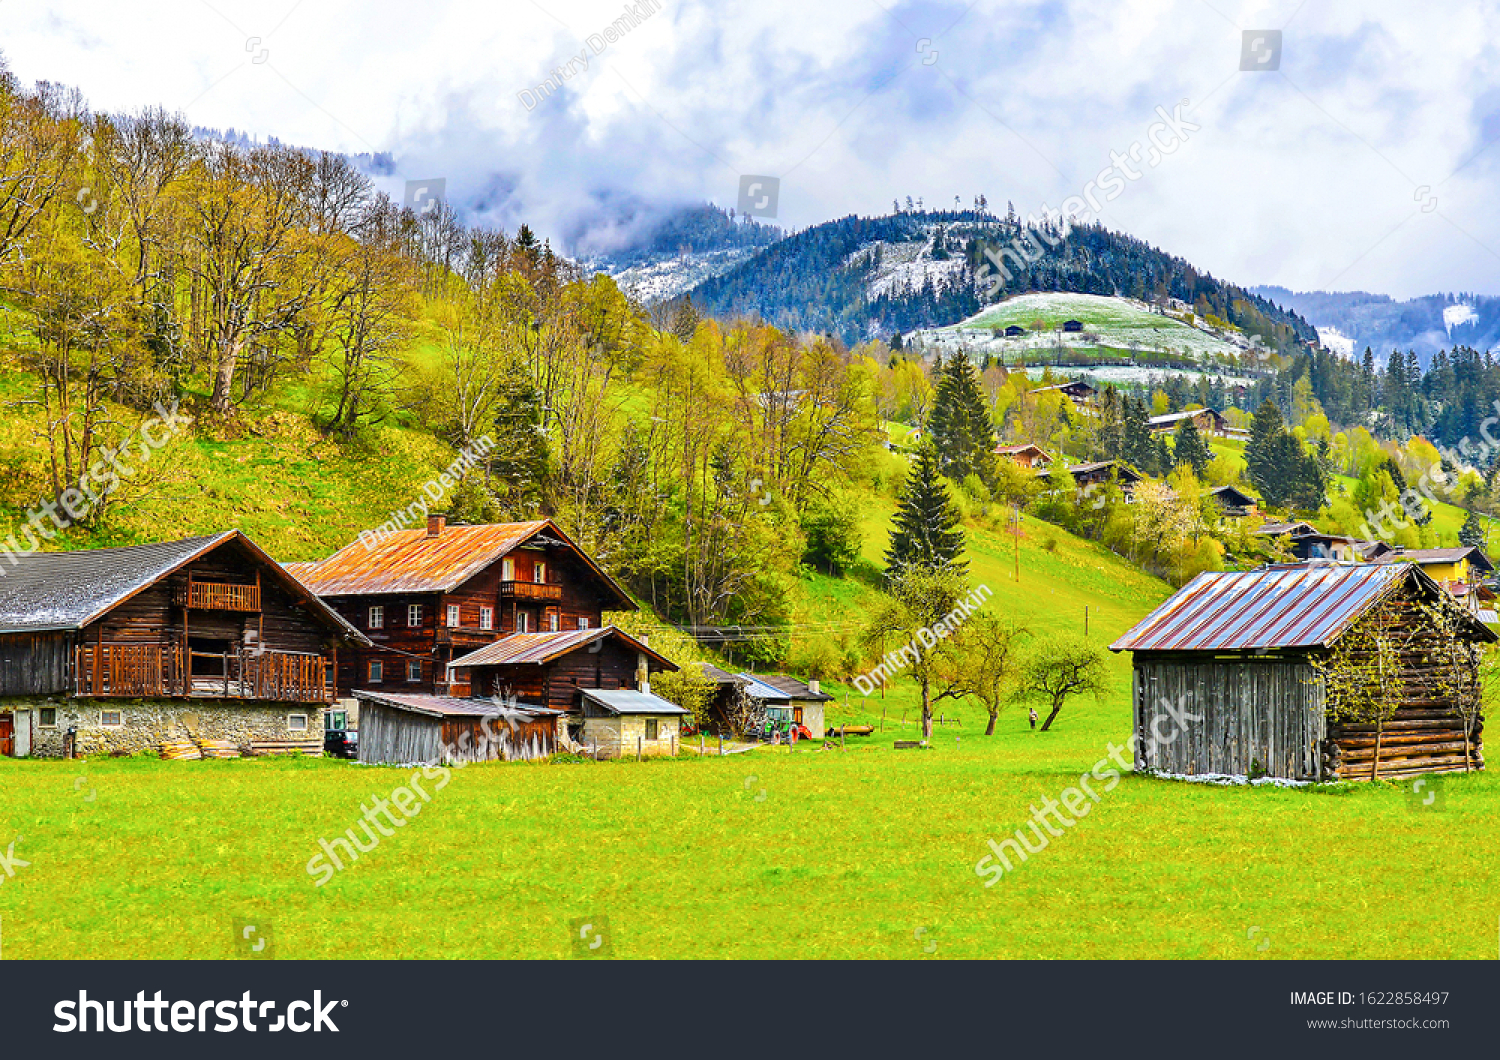 Mountain village in Europe landscapes #1622858497